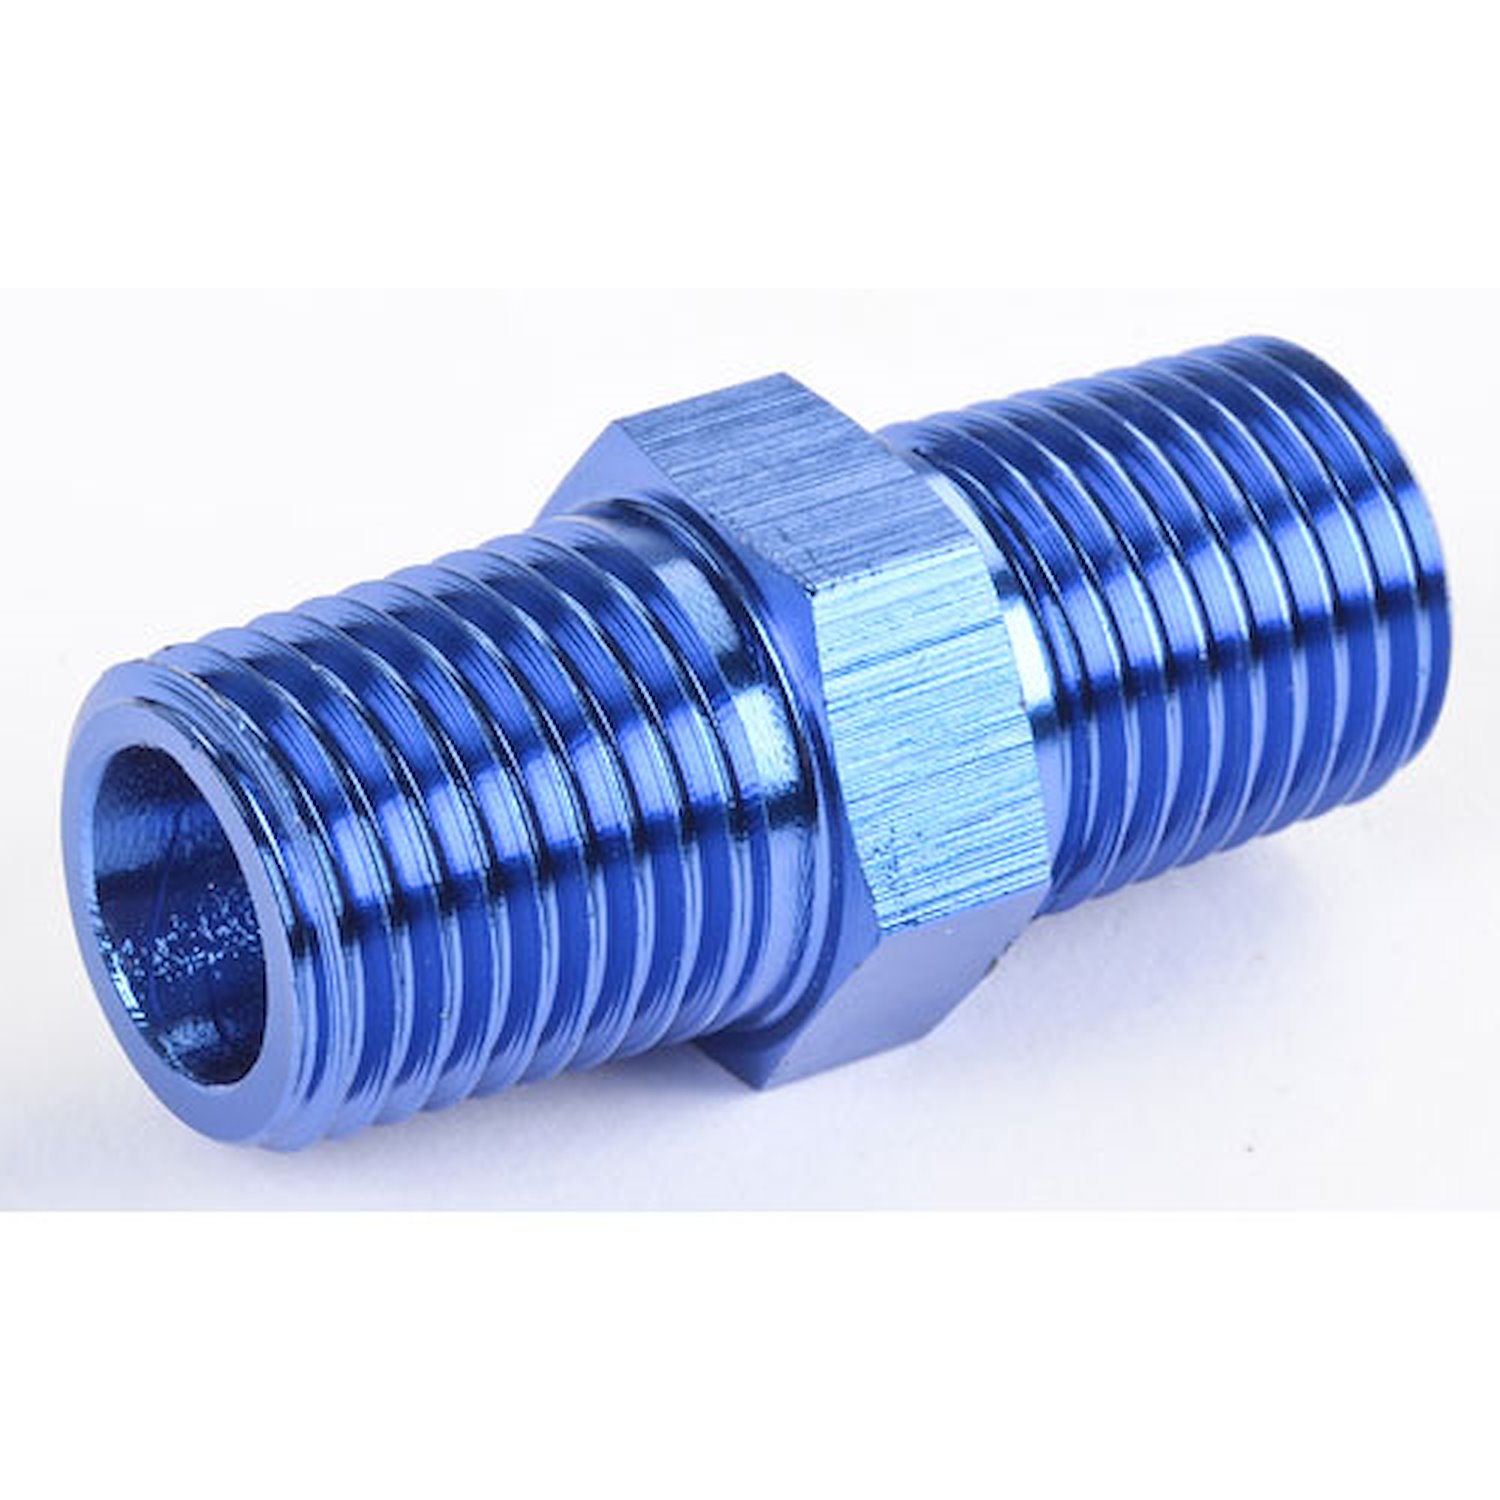 NPT to NPT Straight Union Fitting [1/4 in. NPT Male to 1/4 in. NPT Male, Blue]